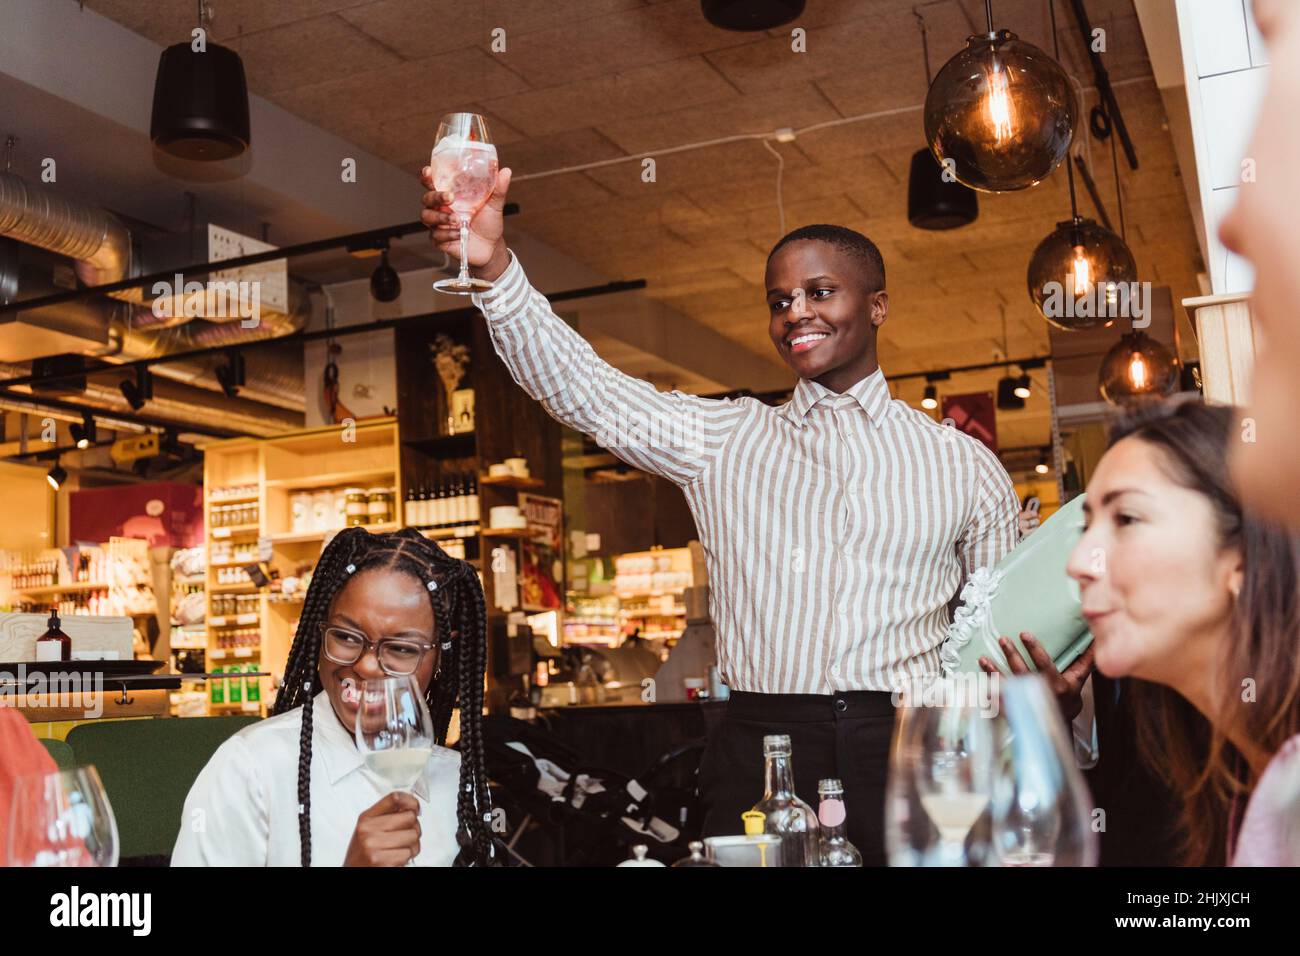 Smiling man holding wineglass by male and female friends during dinner party at bar Stock Photo